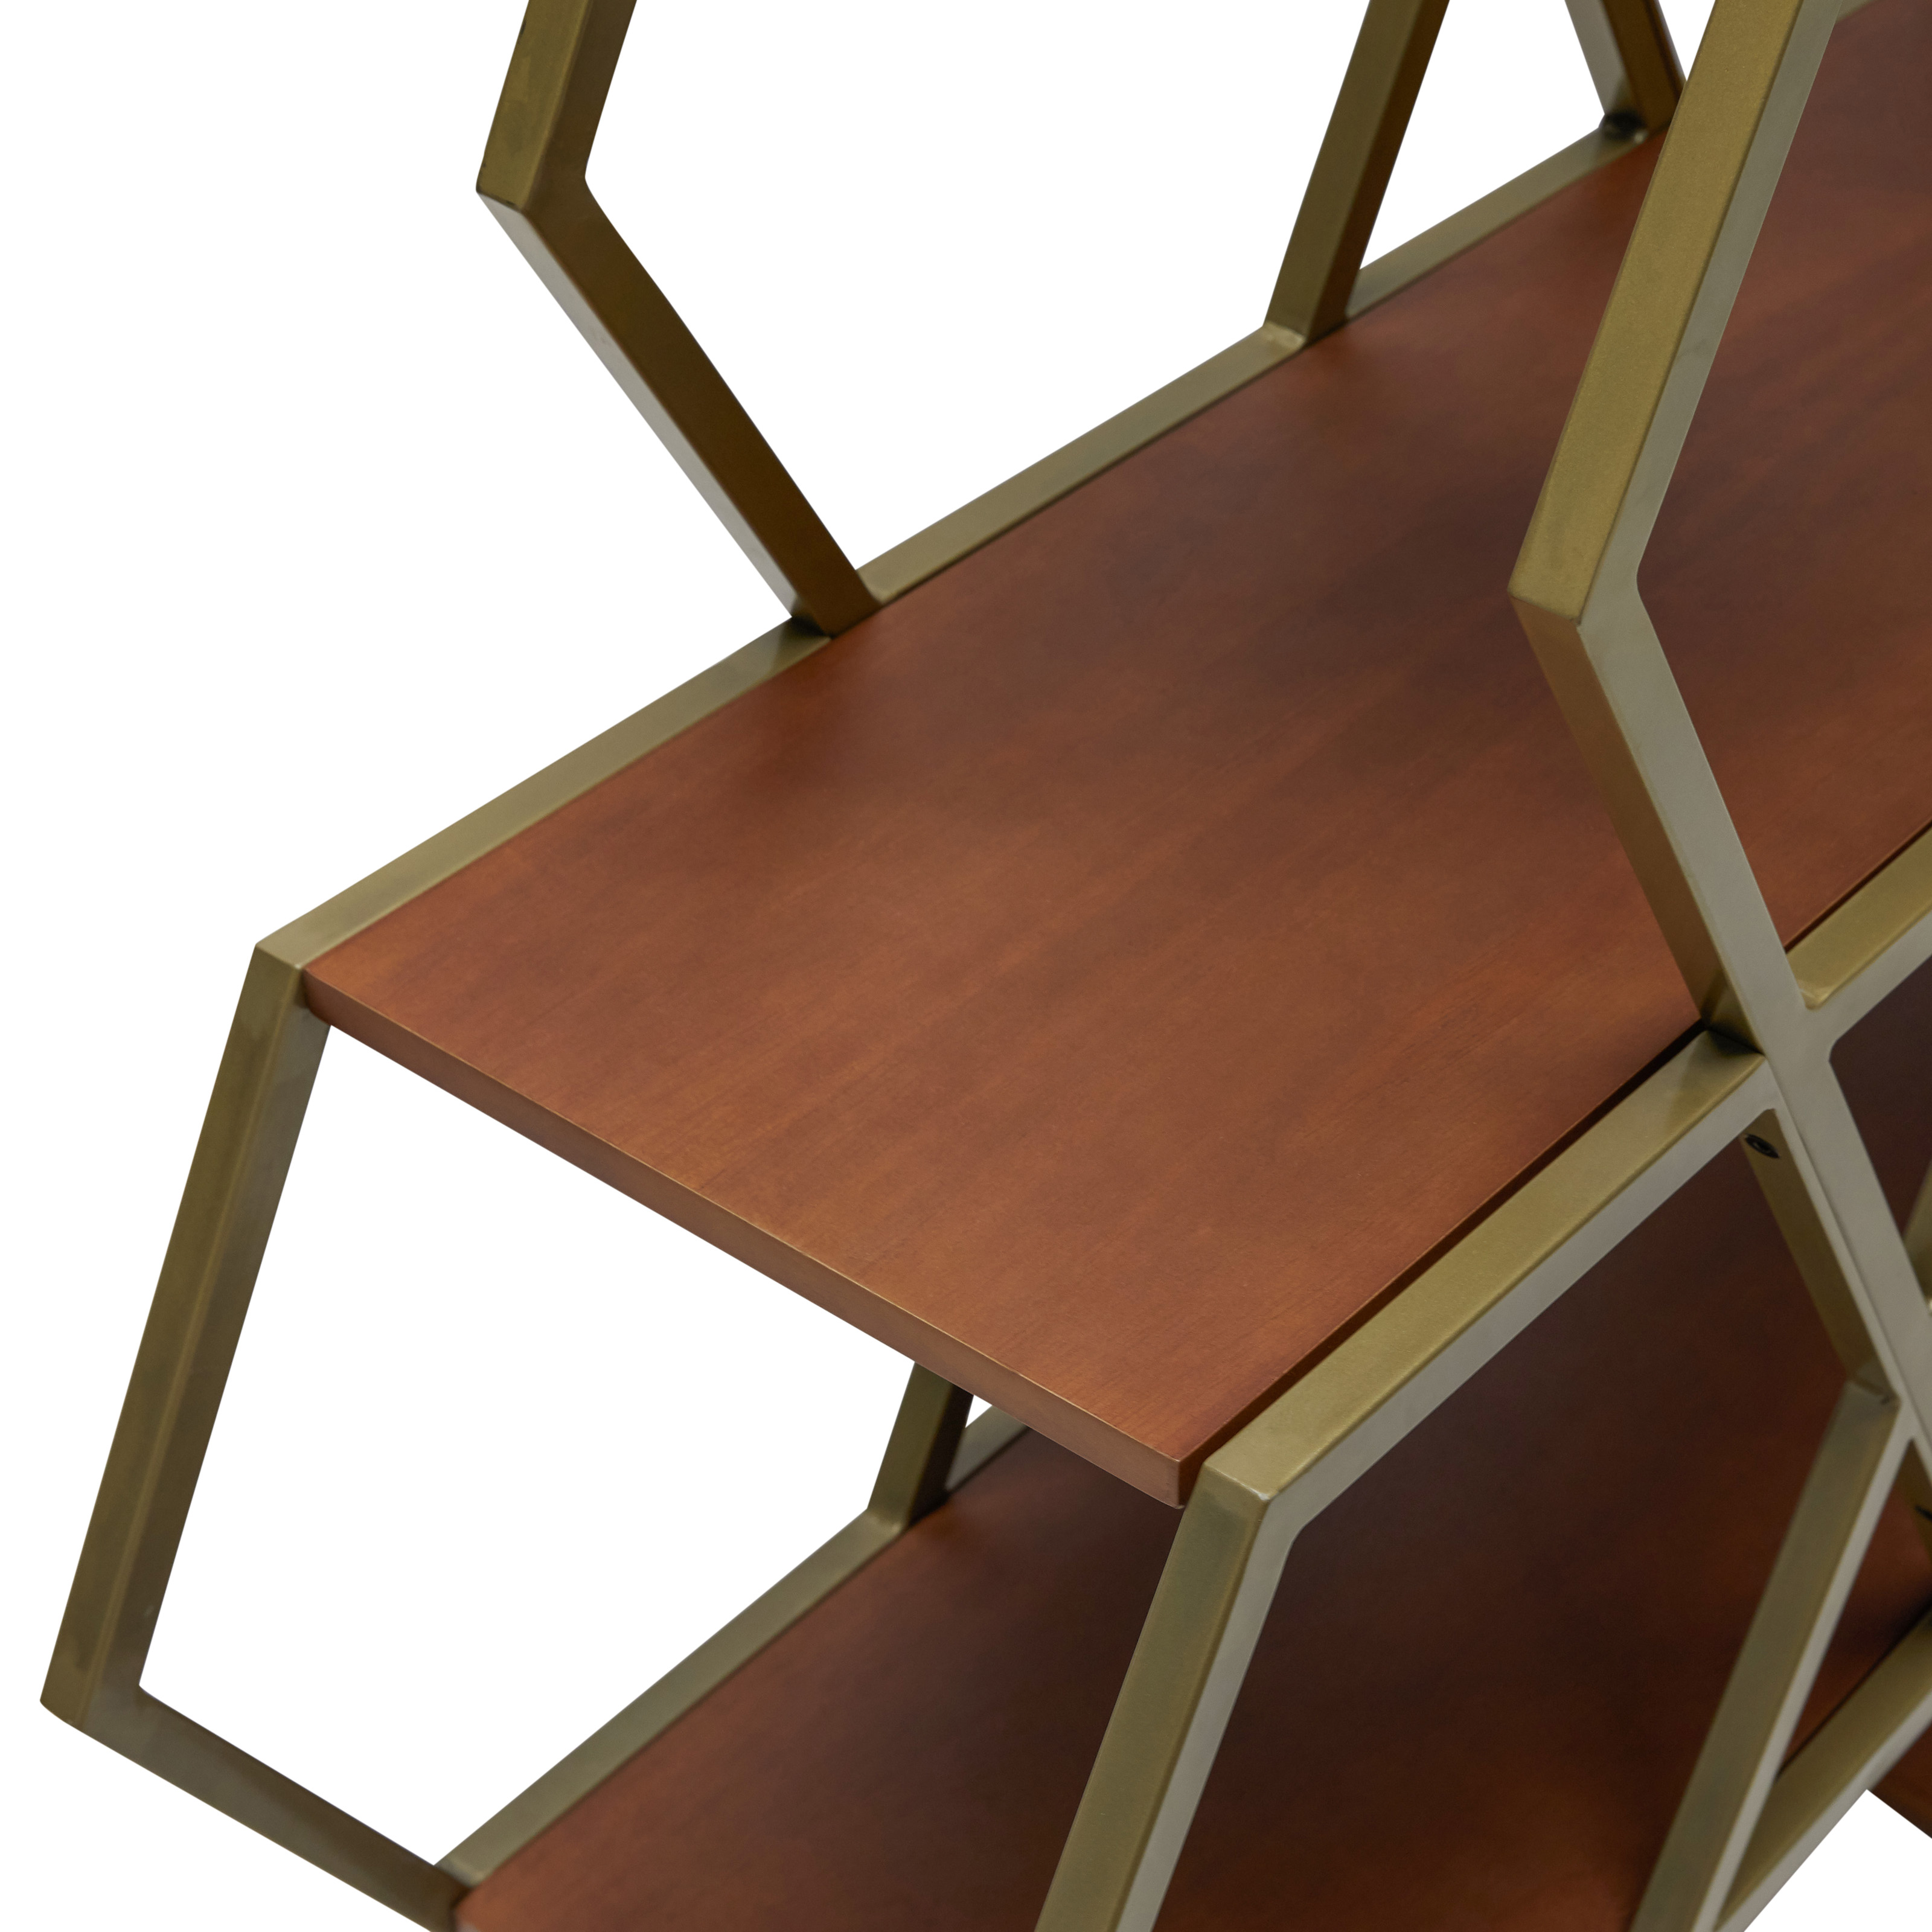 Hexagon Large Bookshelf by Drew Barrymore Flower Home - image 3 of 10